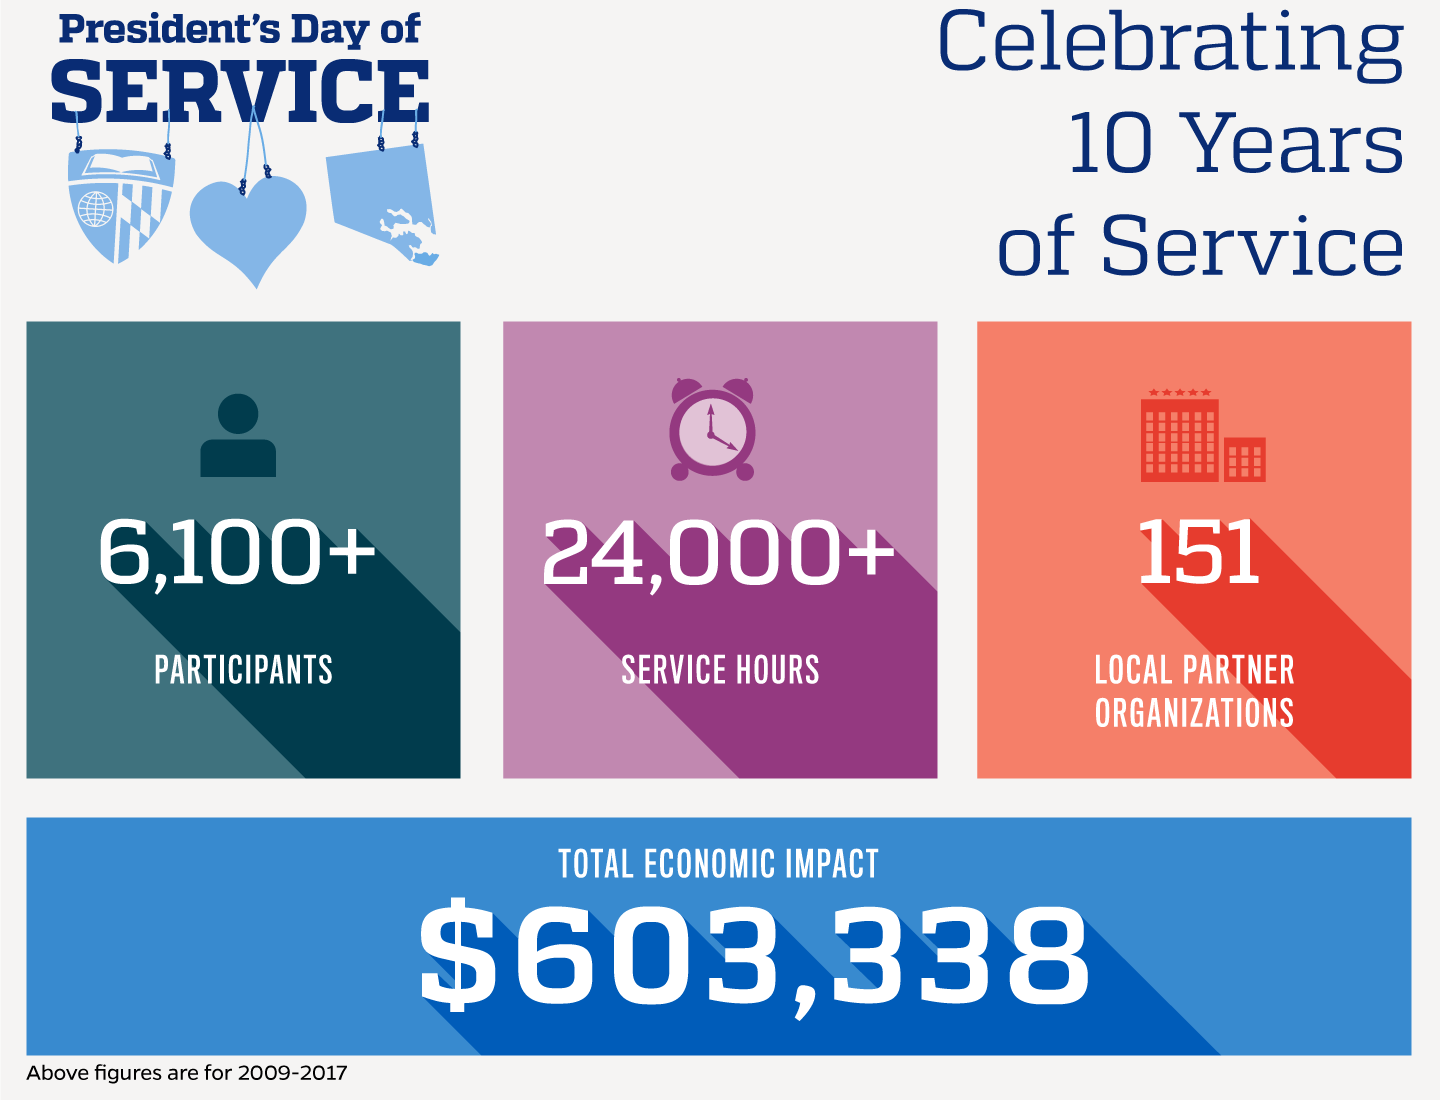 Infographic shows impact figures for the President's Day of Service